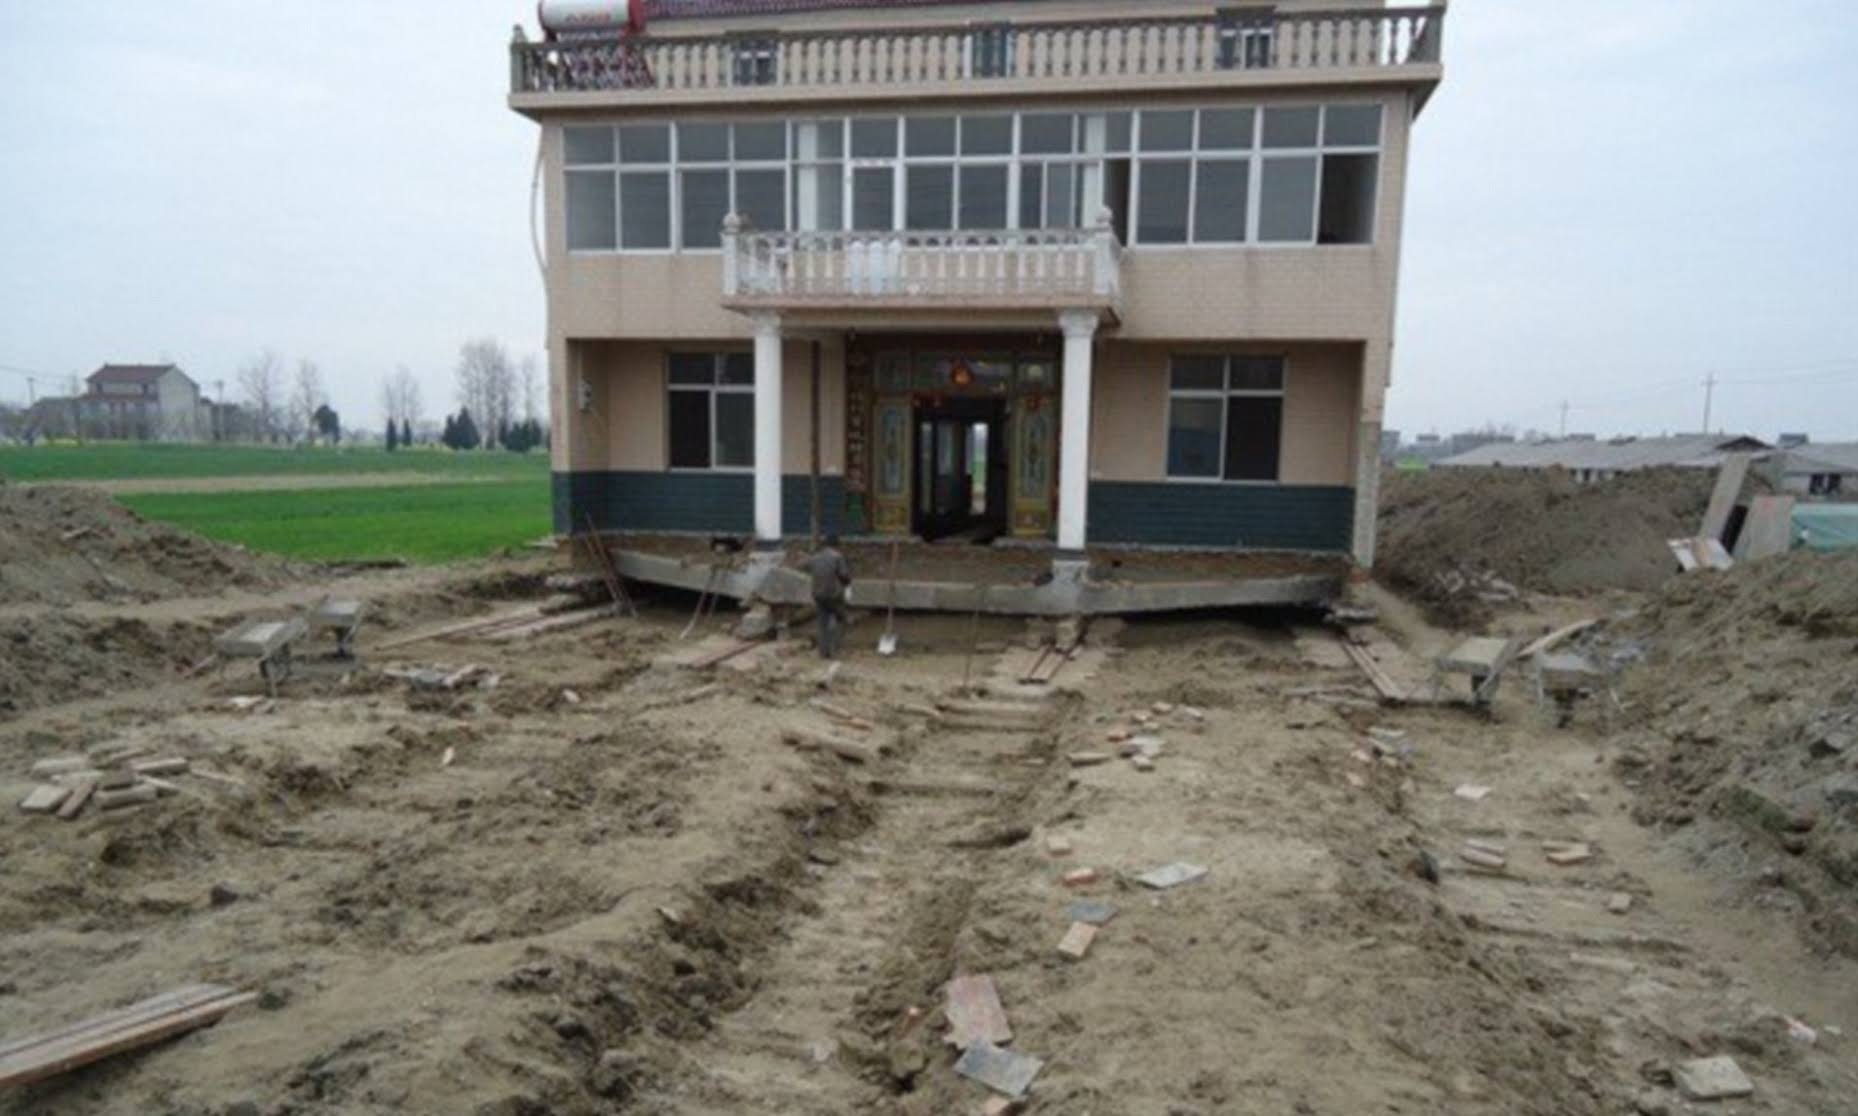 Chinese Man Moves His House After Government Threatened To Demolish It (photos)  5056711_3e974242000005780imagea311490361615793_jpeg83f4a710564872ca4597a5706ea499ac